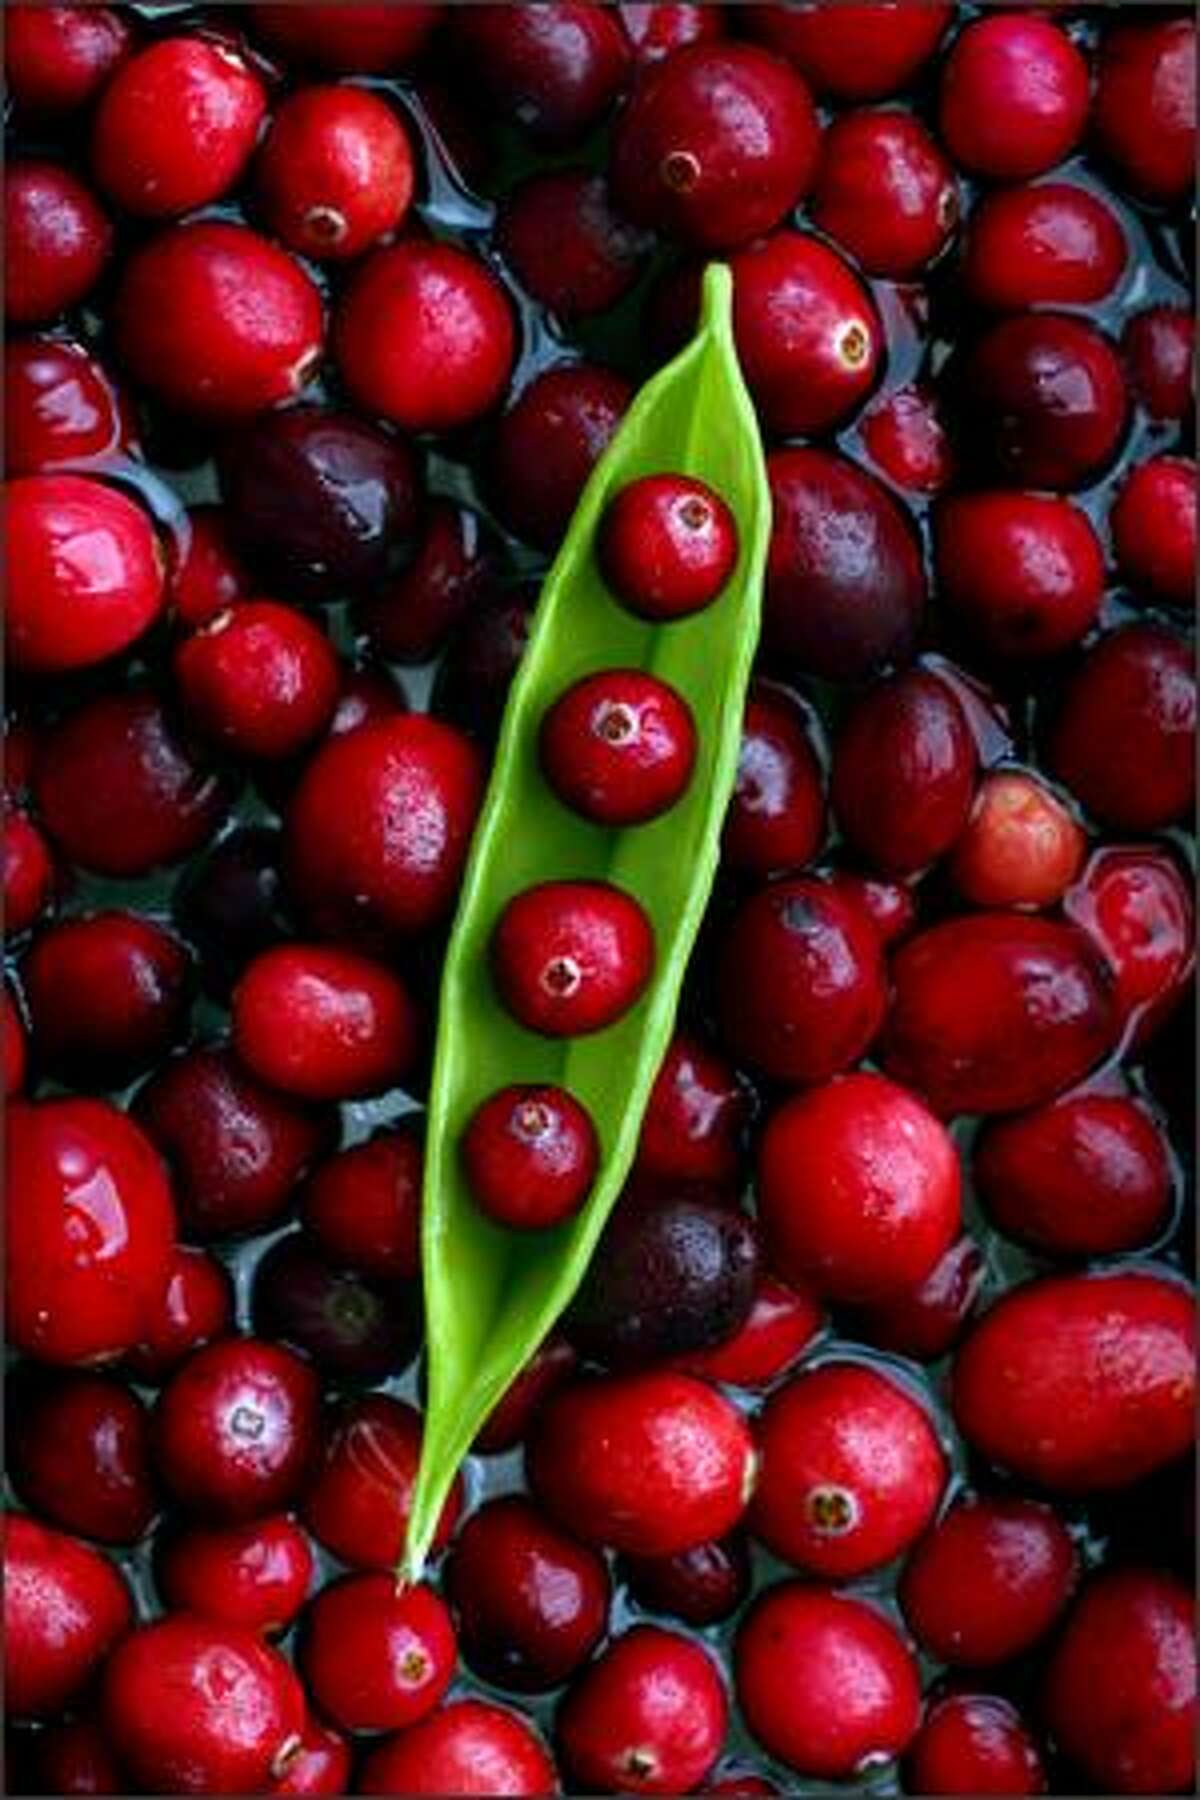 Cranberries for the holidays.